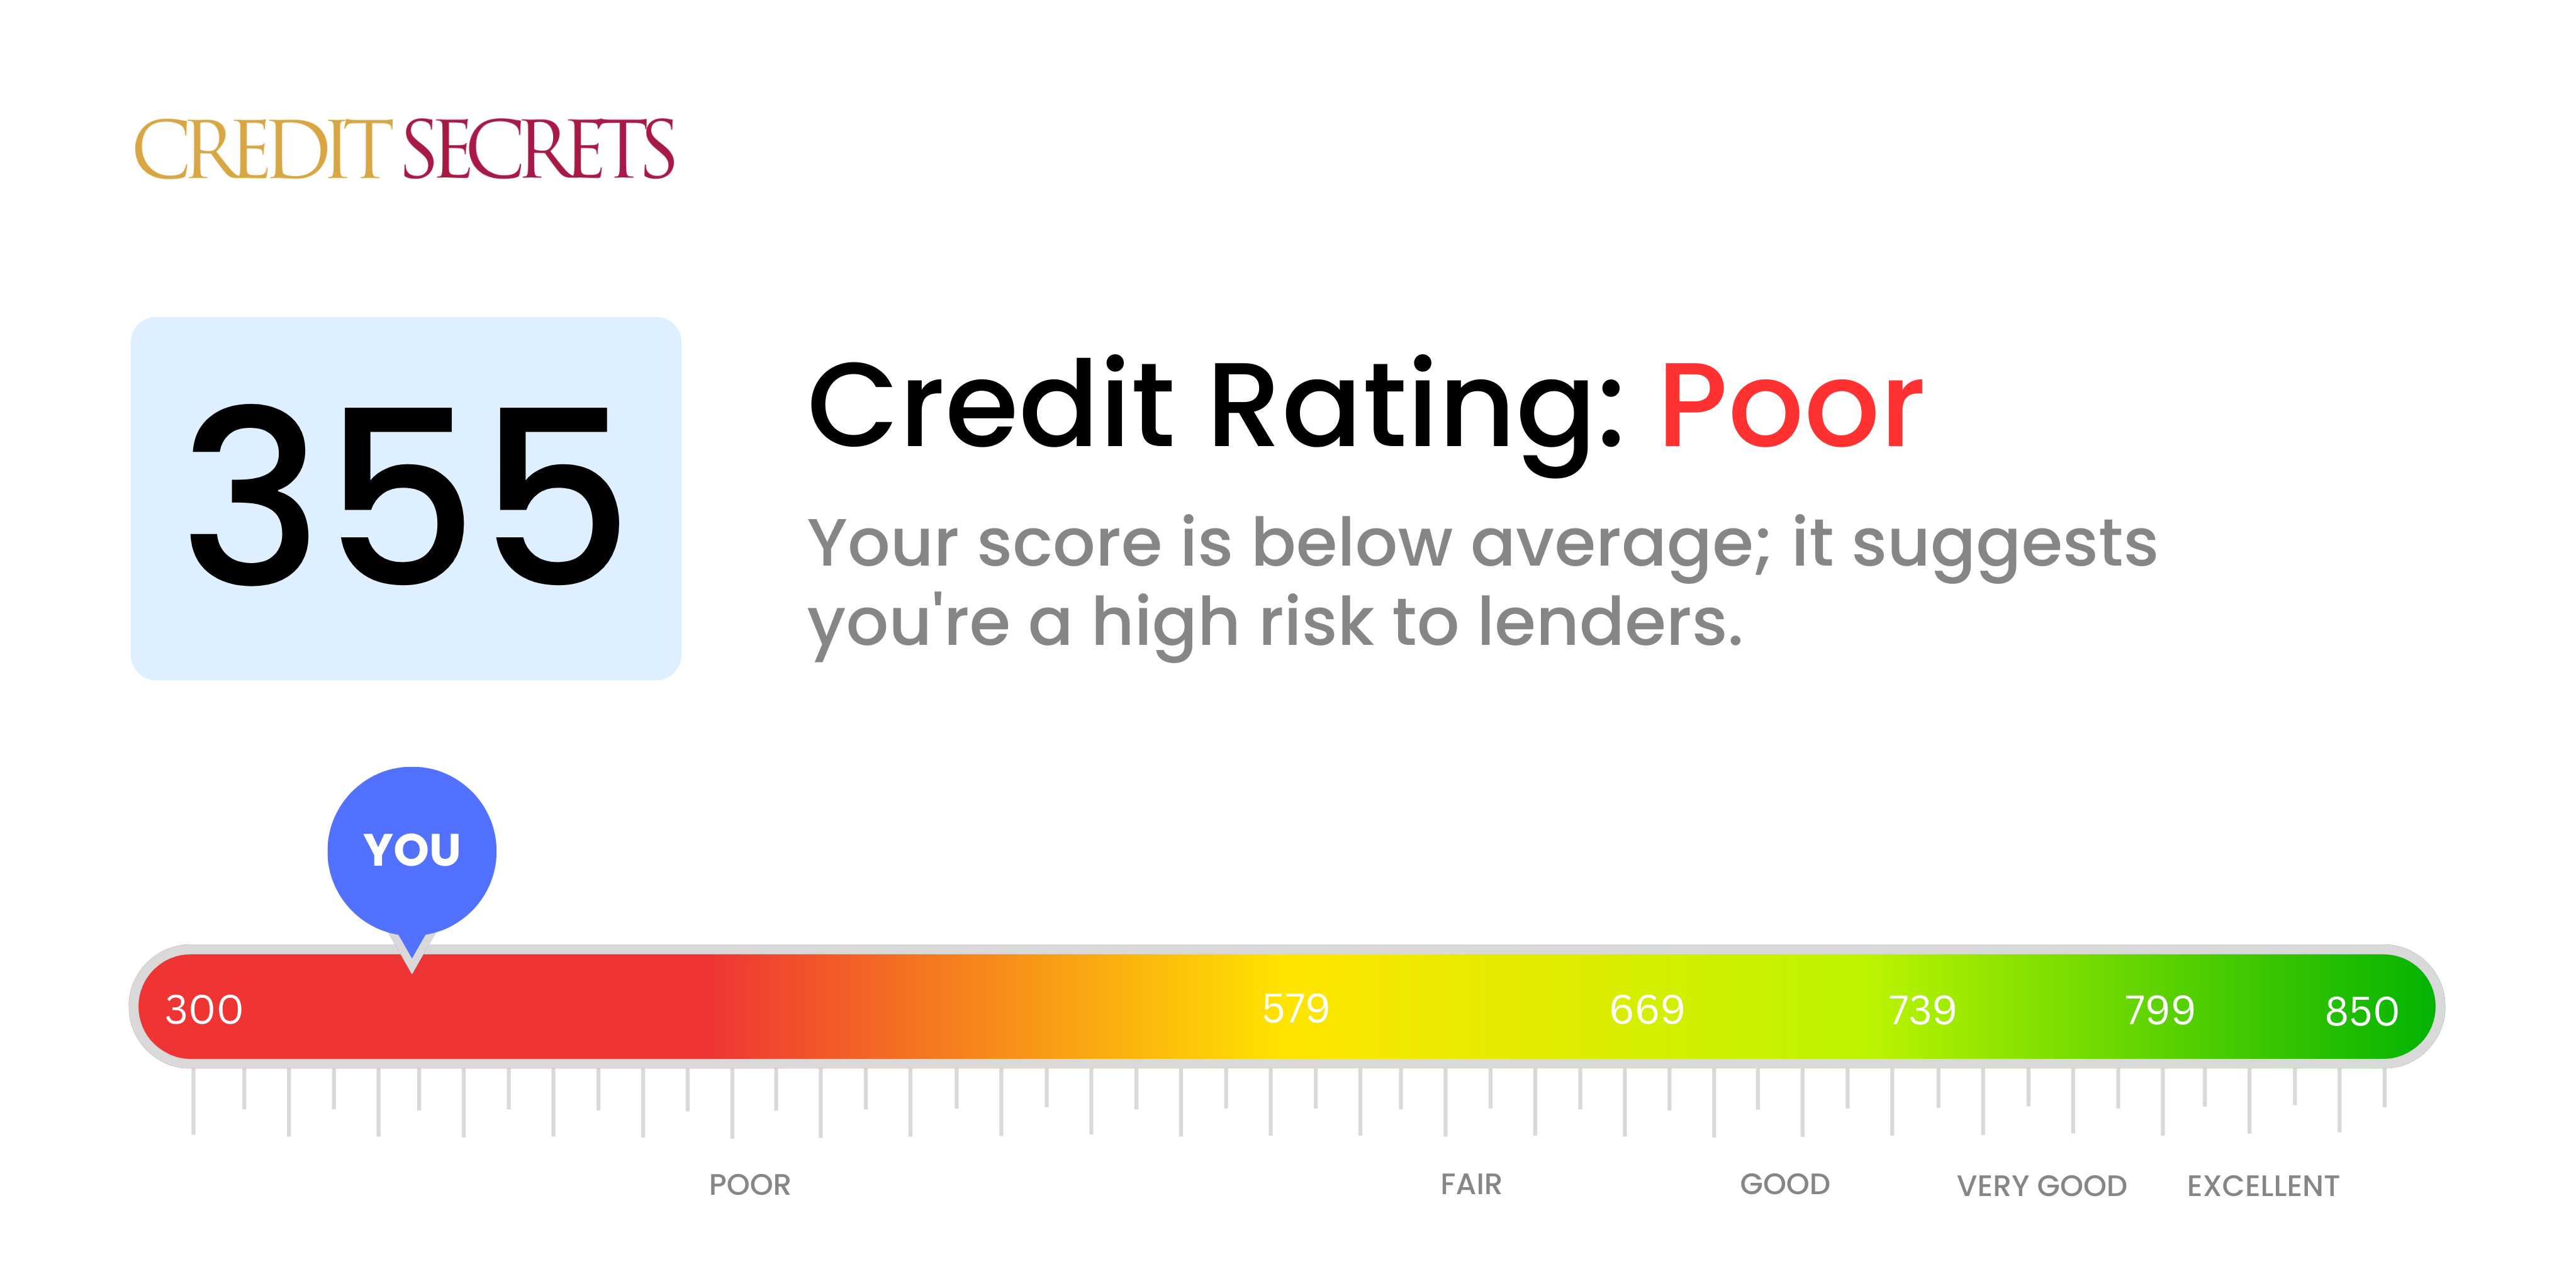 Is 355 a good credit score?